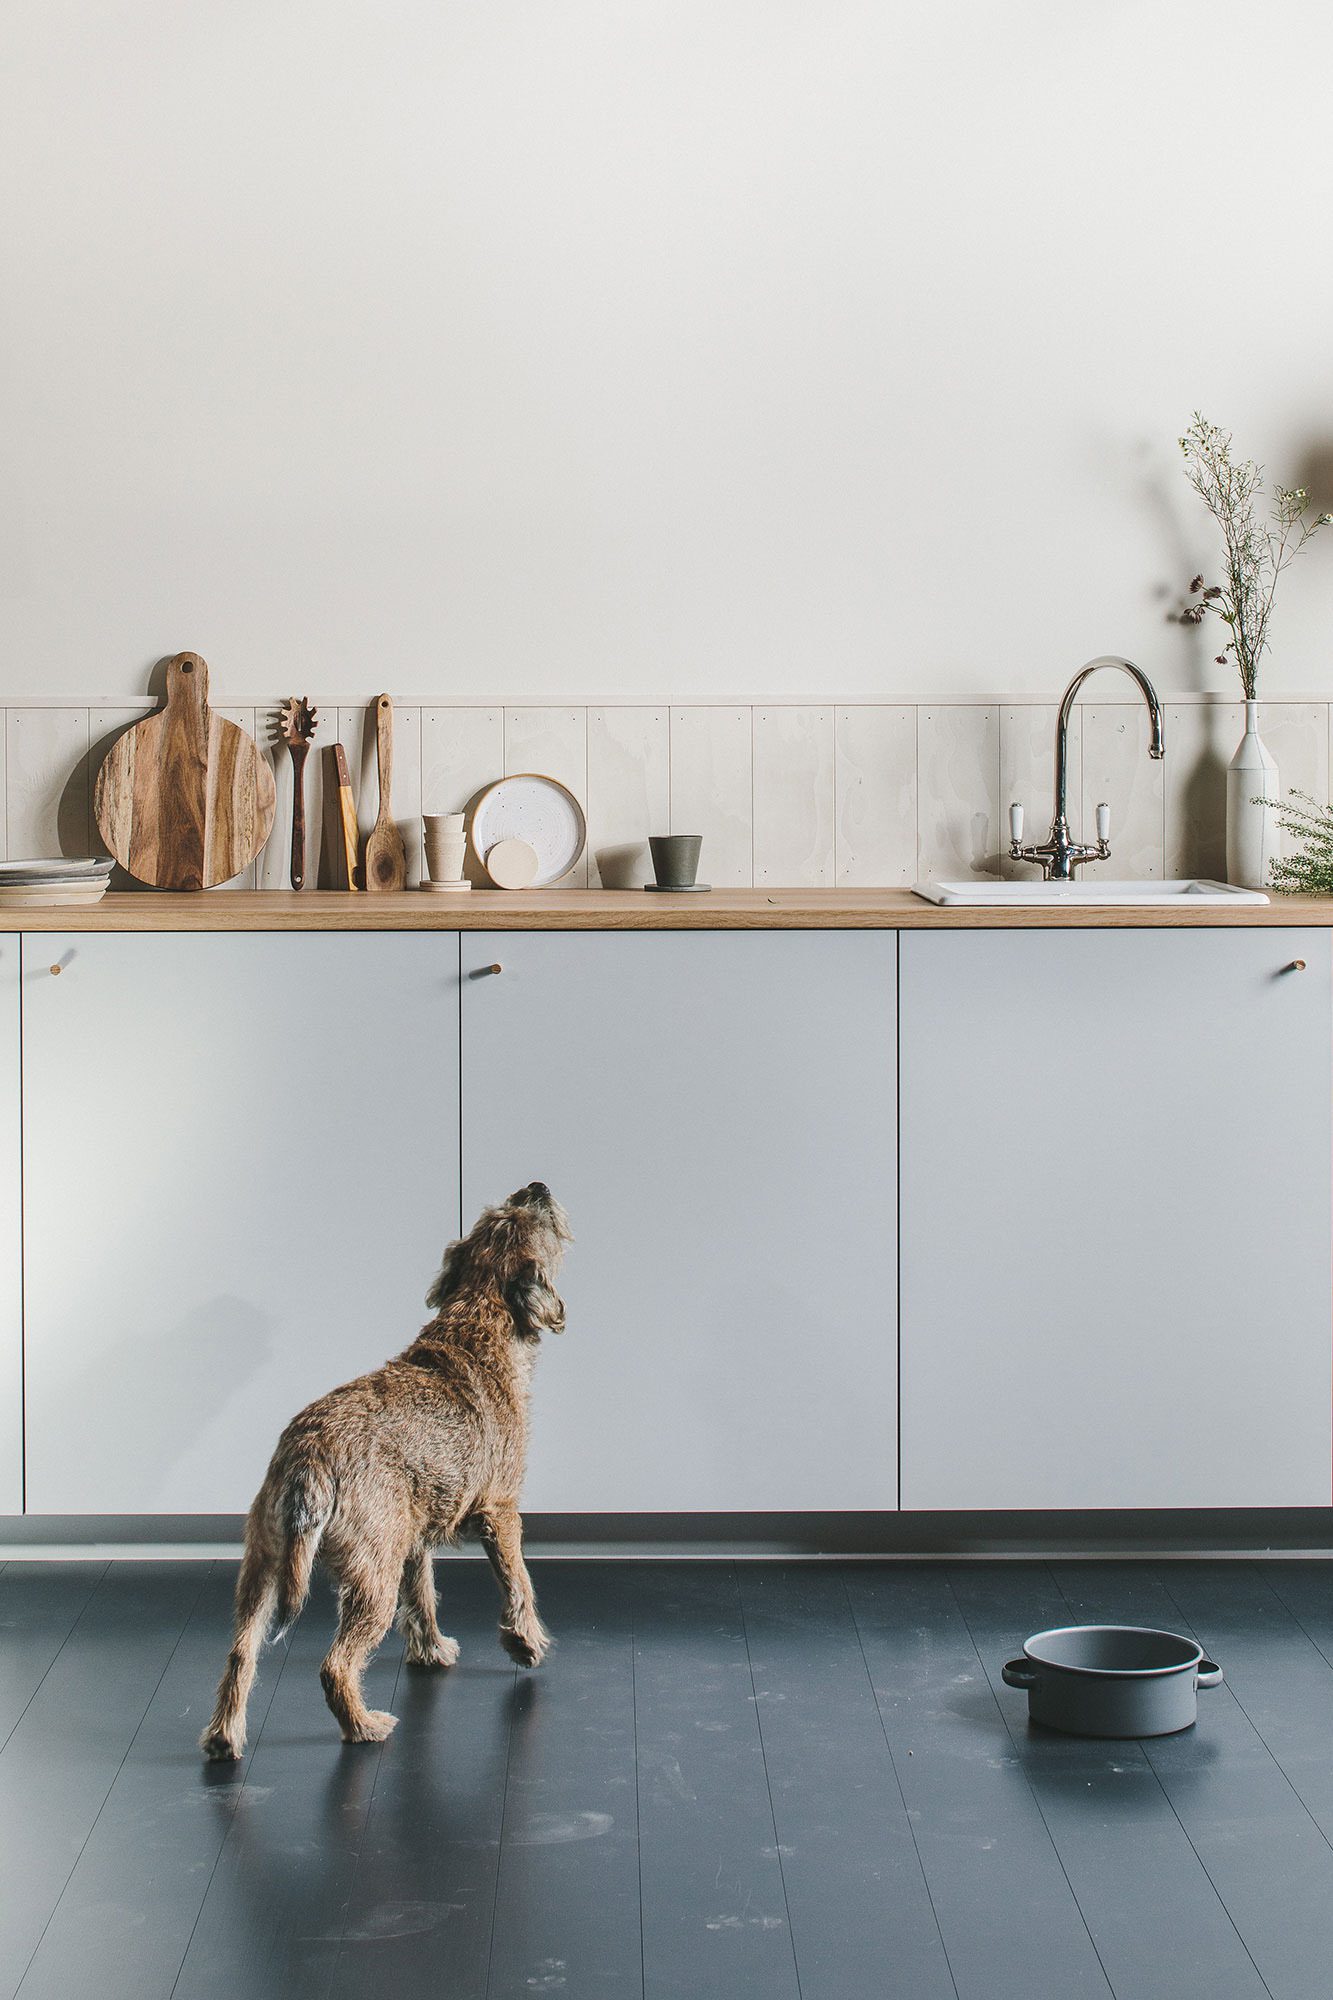 An image of a dog looking up at a kitchen counter.